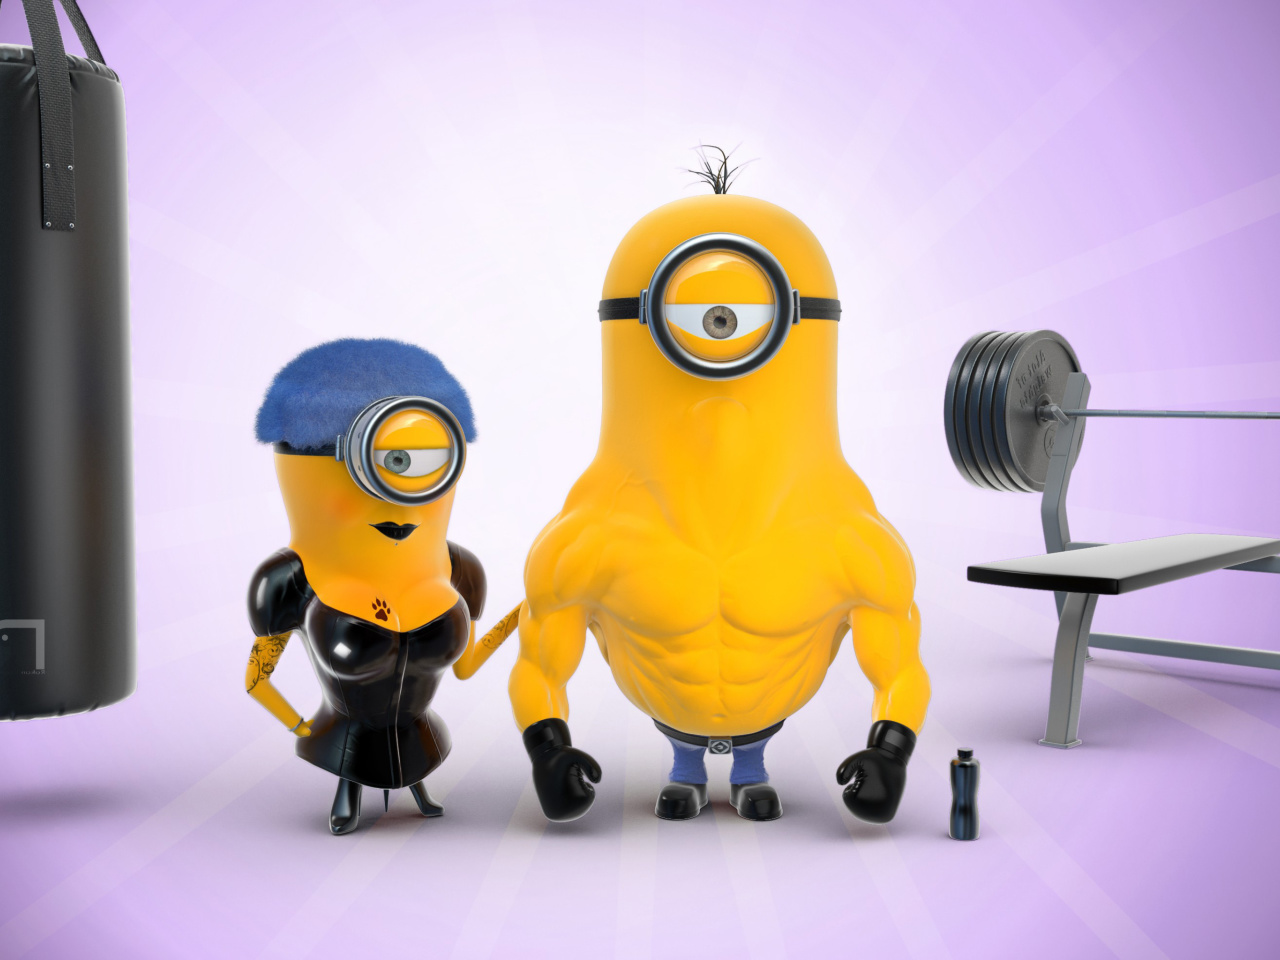 Despicable Me 2 in Gym screenshot #1 1280x960